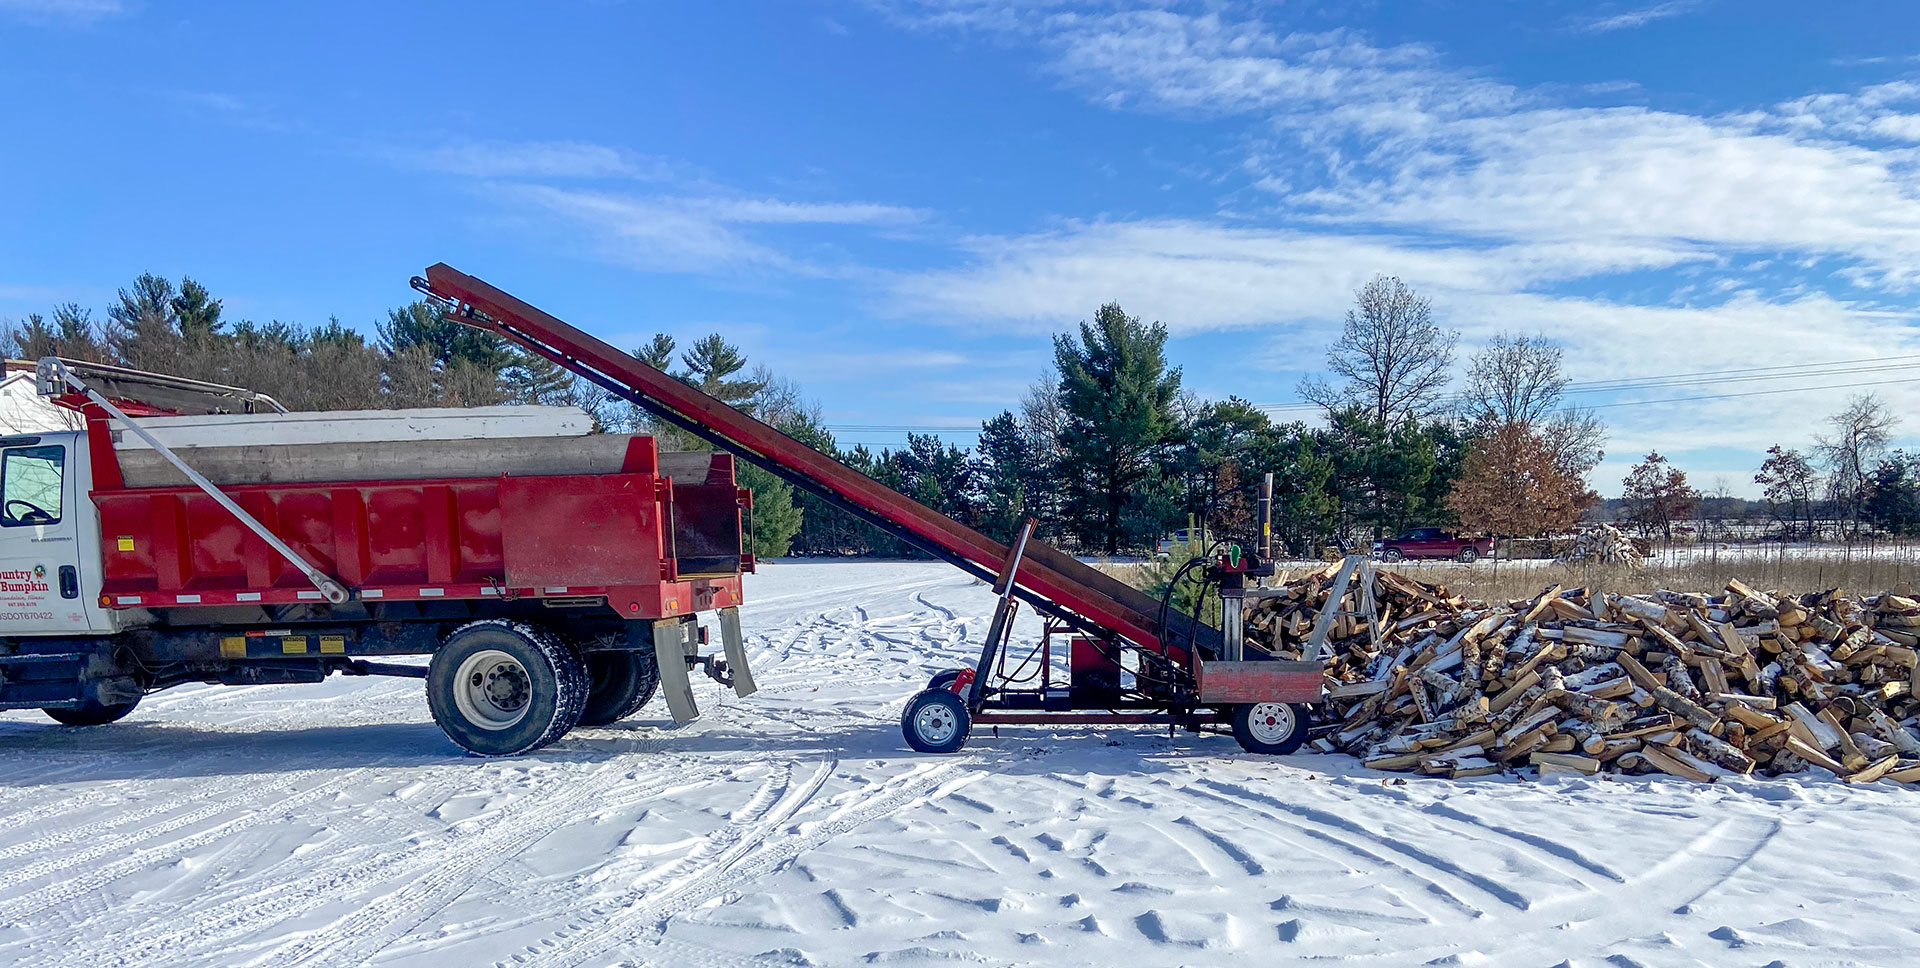 Loading Wisconsin birch and cherry firewood for the Country Bumpkin Garden Center in Hawthorn Woods, Illinois